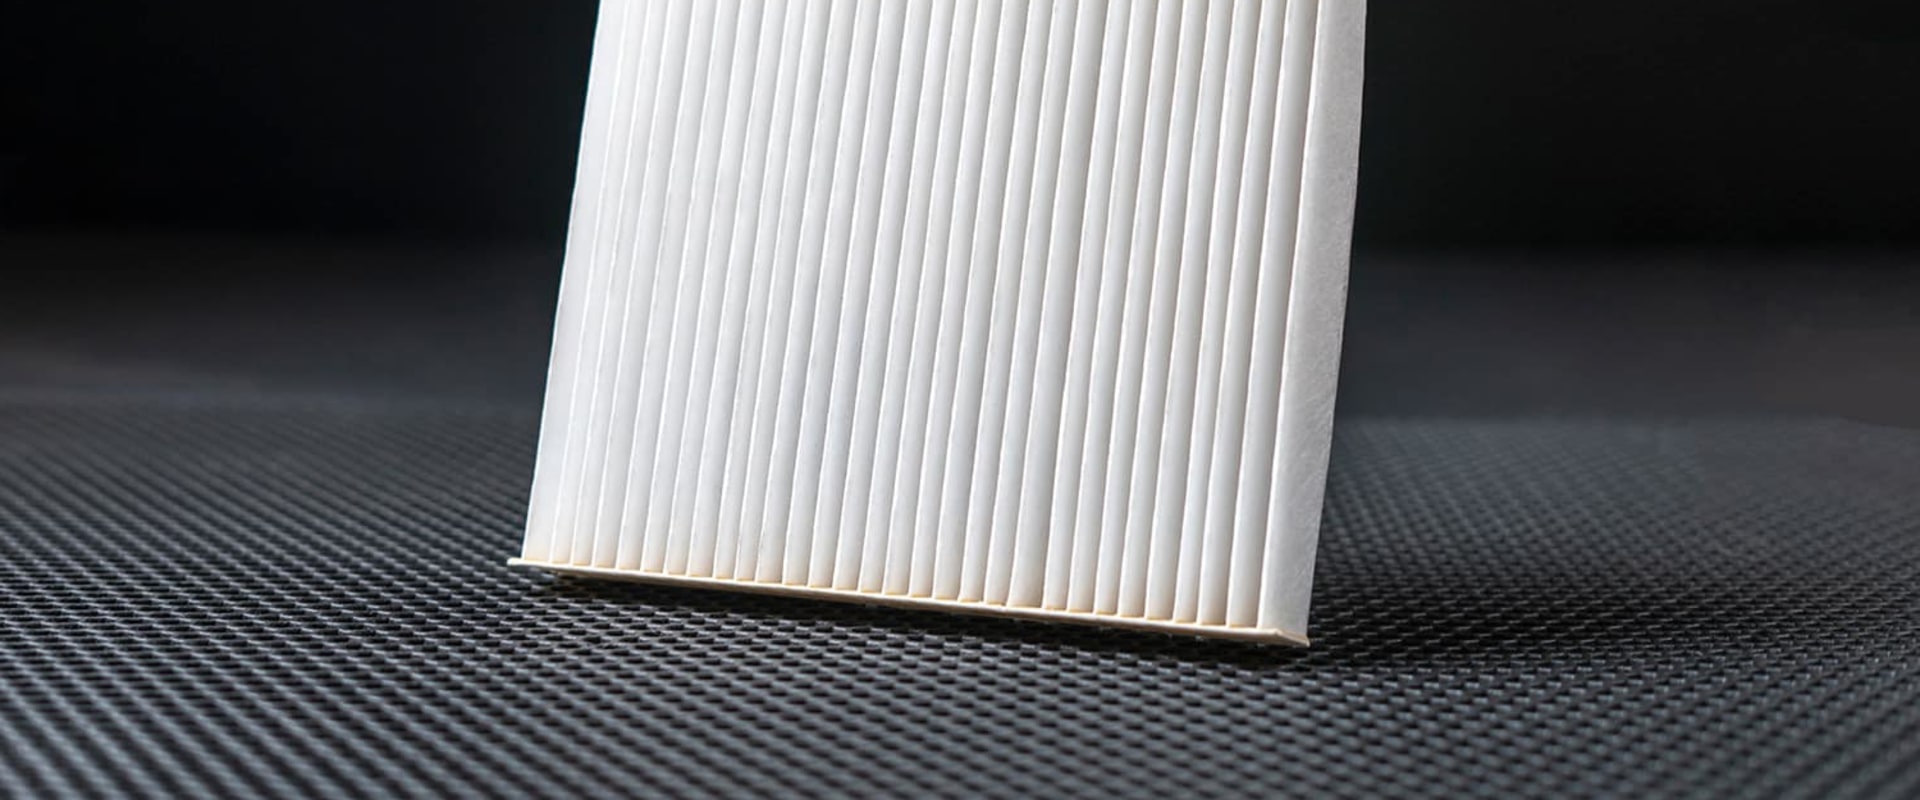 Everything You Need to Know About Air Filters